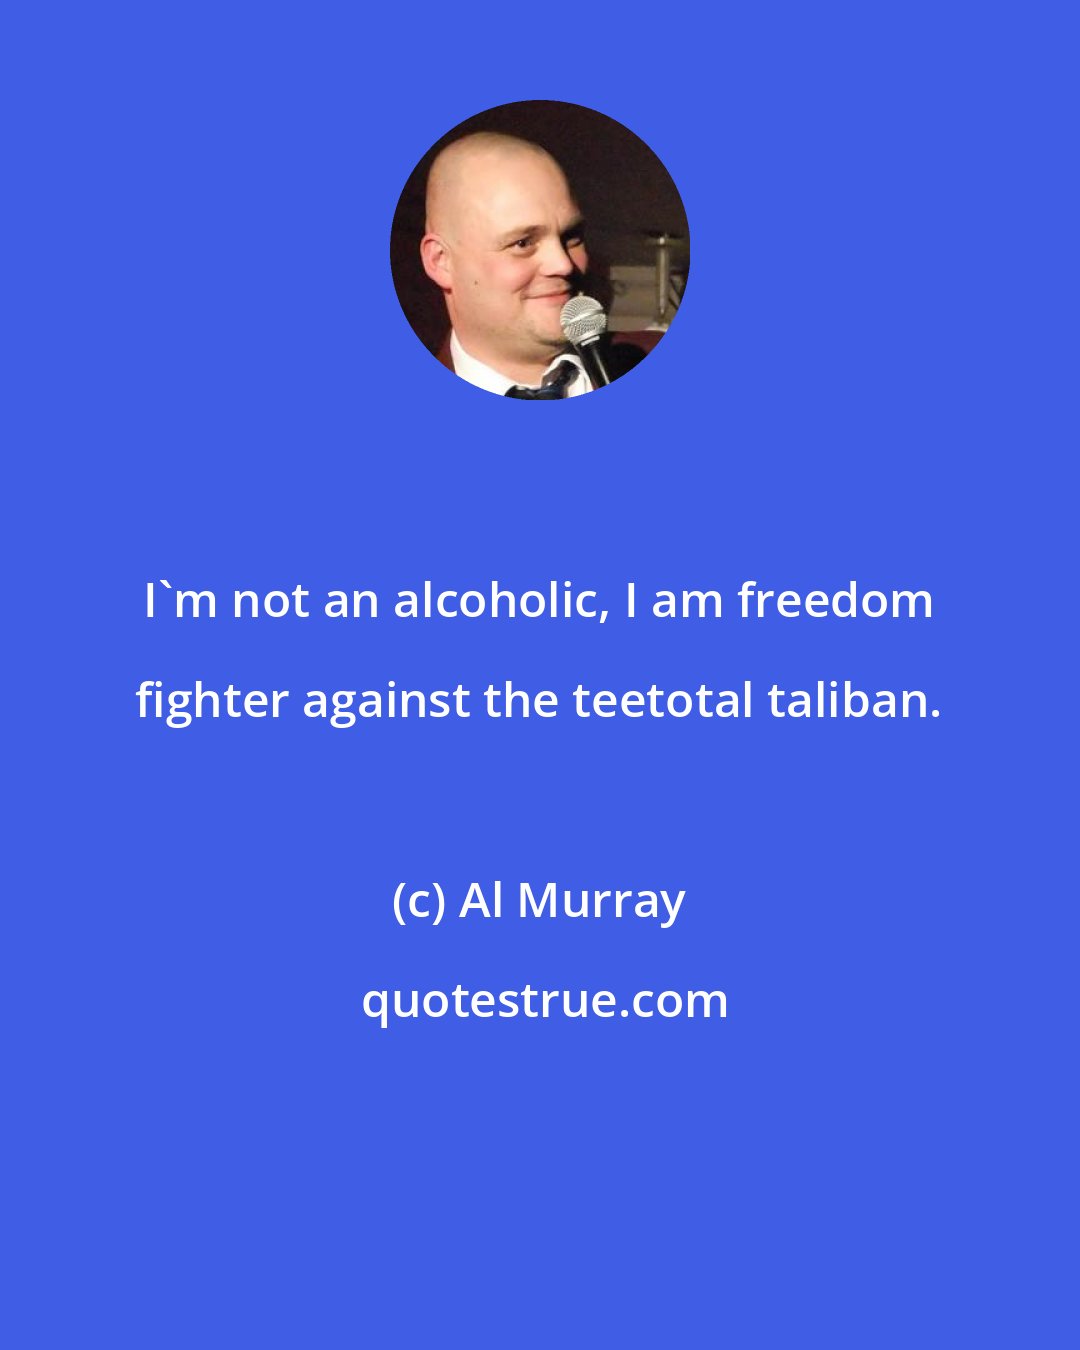 Al Murray: I'm not an alcoholic, I am freedom fighter against the teetotal taliban.